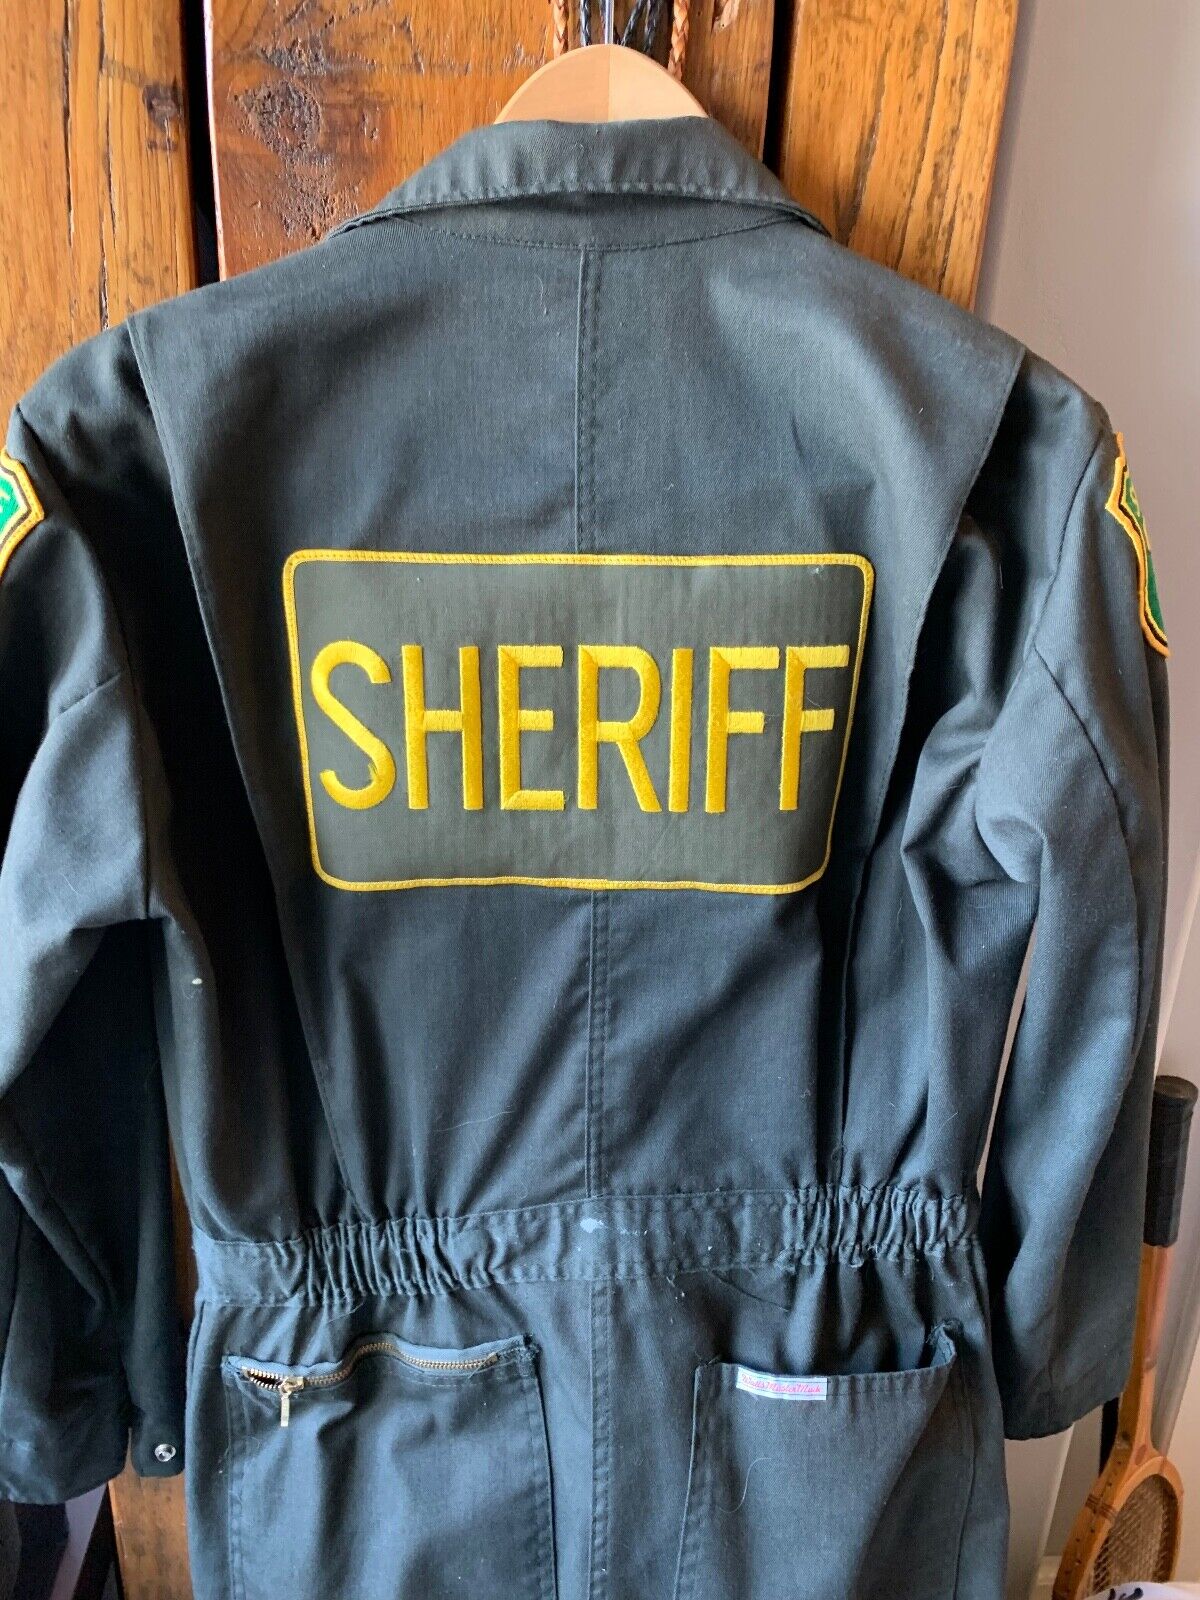 Official Sheriffs uniform jump suit from Yolo County